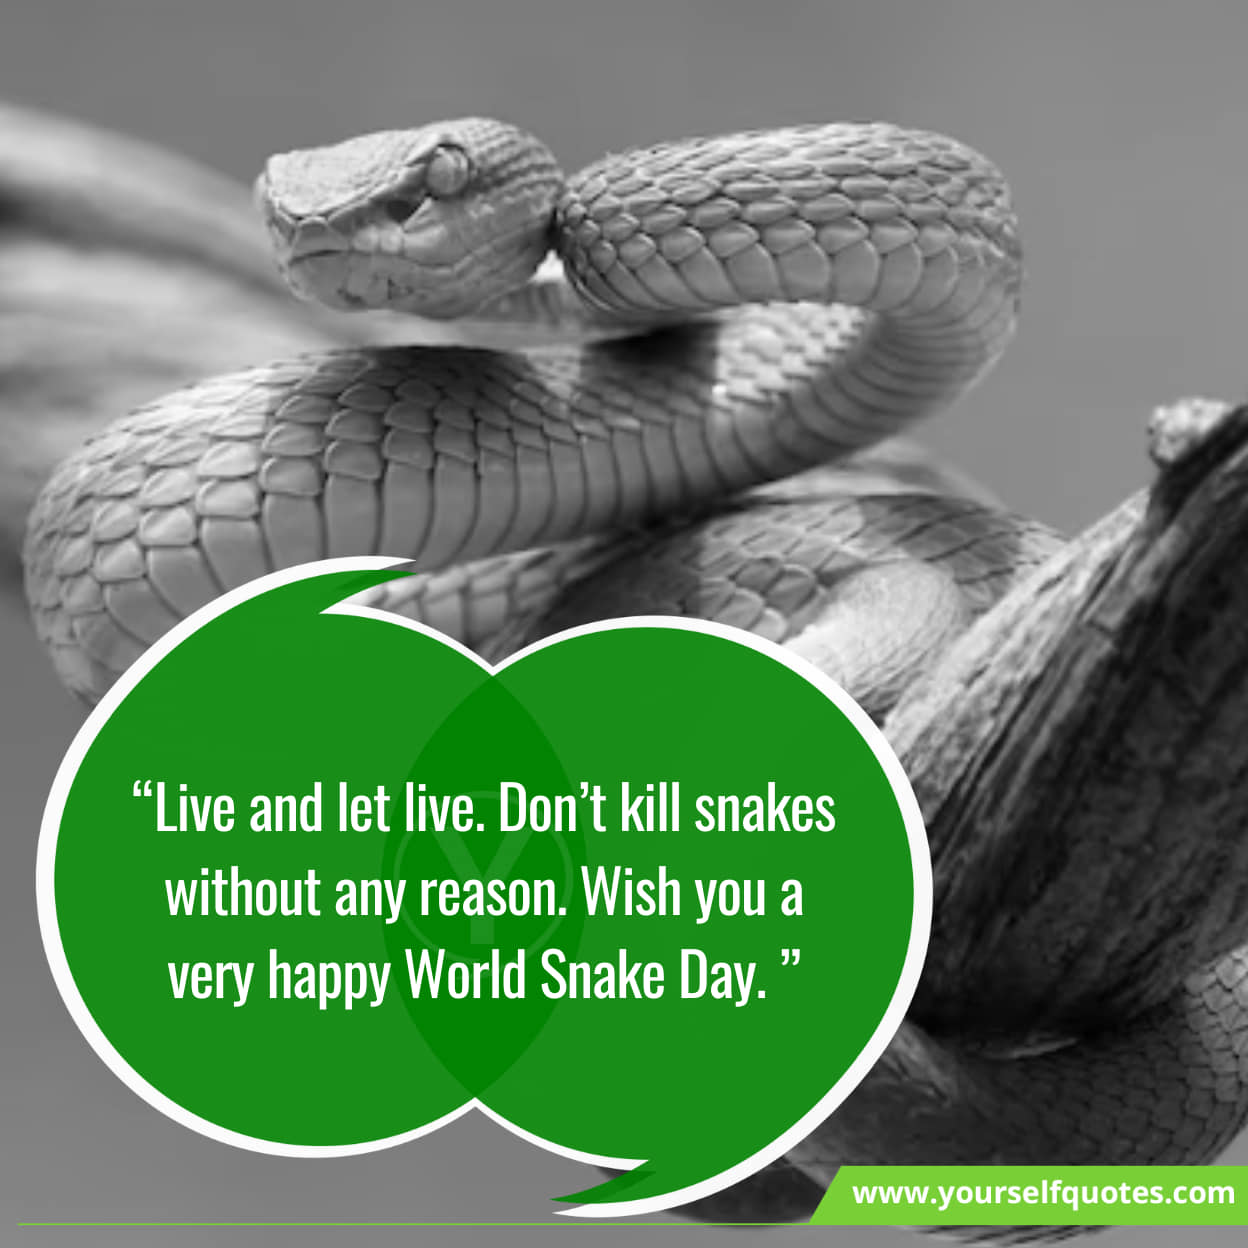 Inspirational quotes for reptile lovers